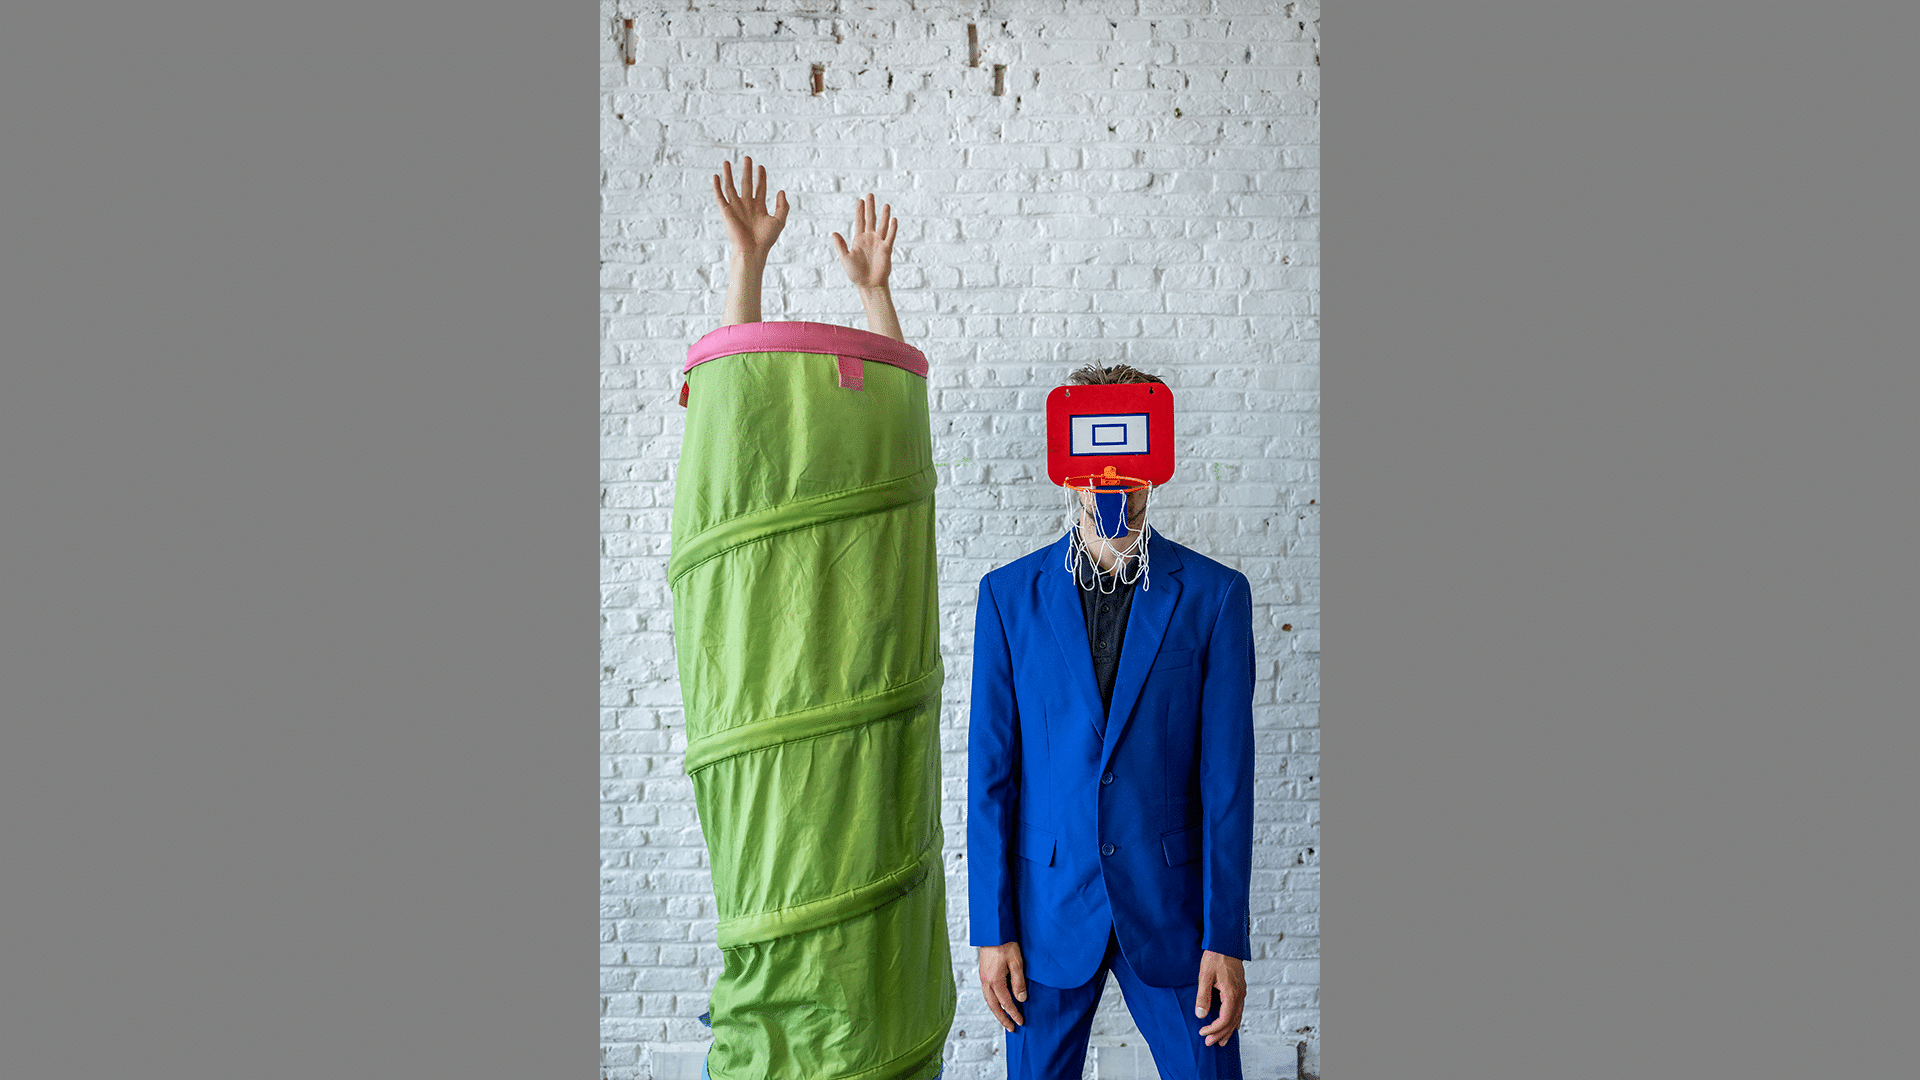 A performer in a blue suit has a mini basketball hoop covering his face, a second performer stands next to him covered up by a green collapsible tunnel.